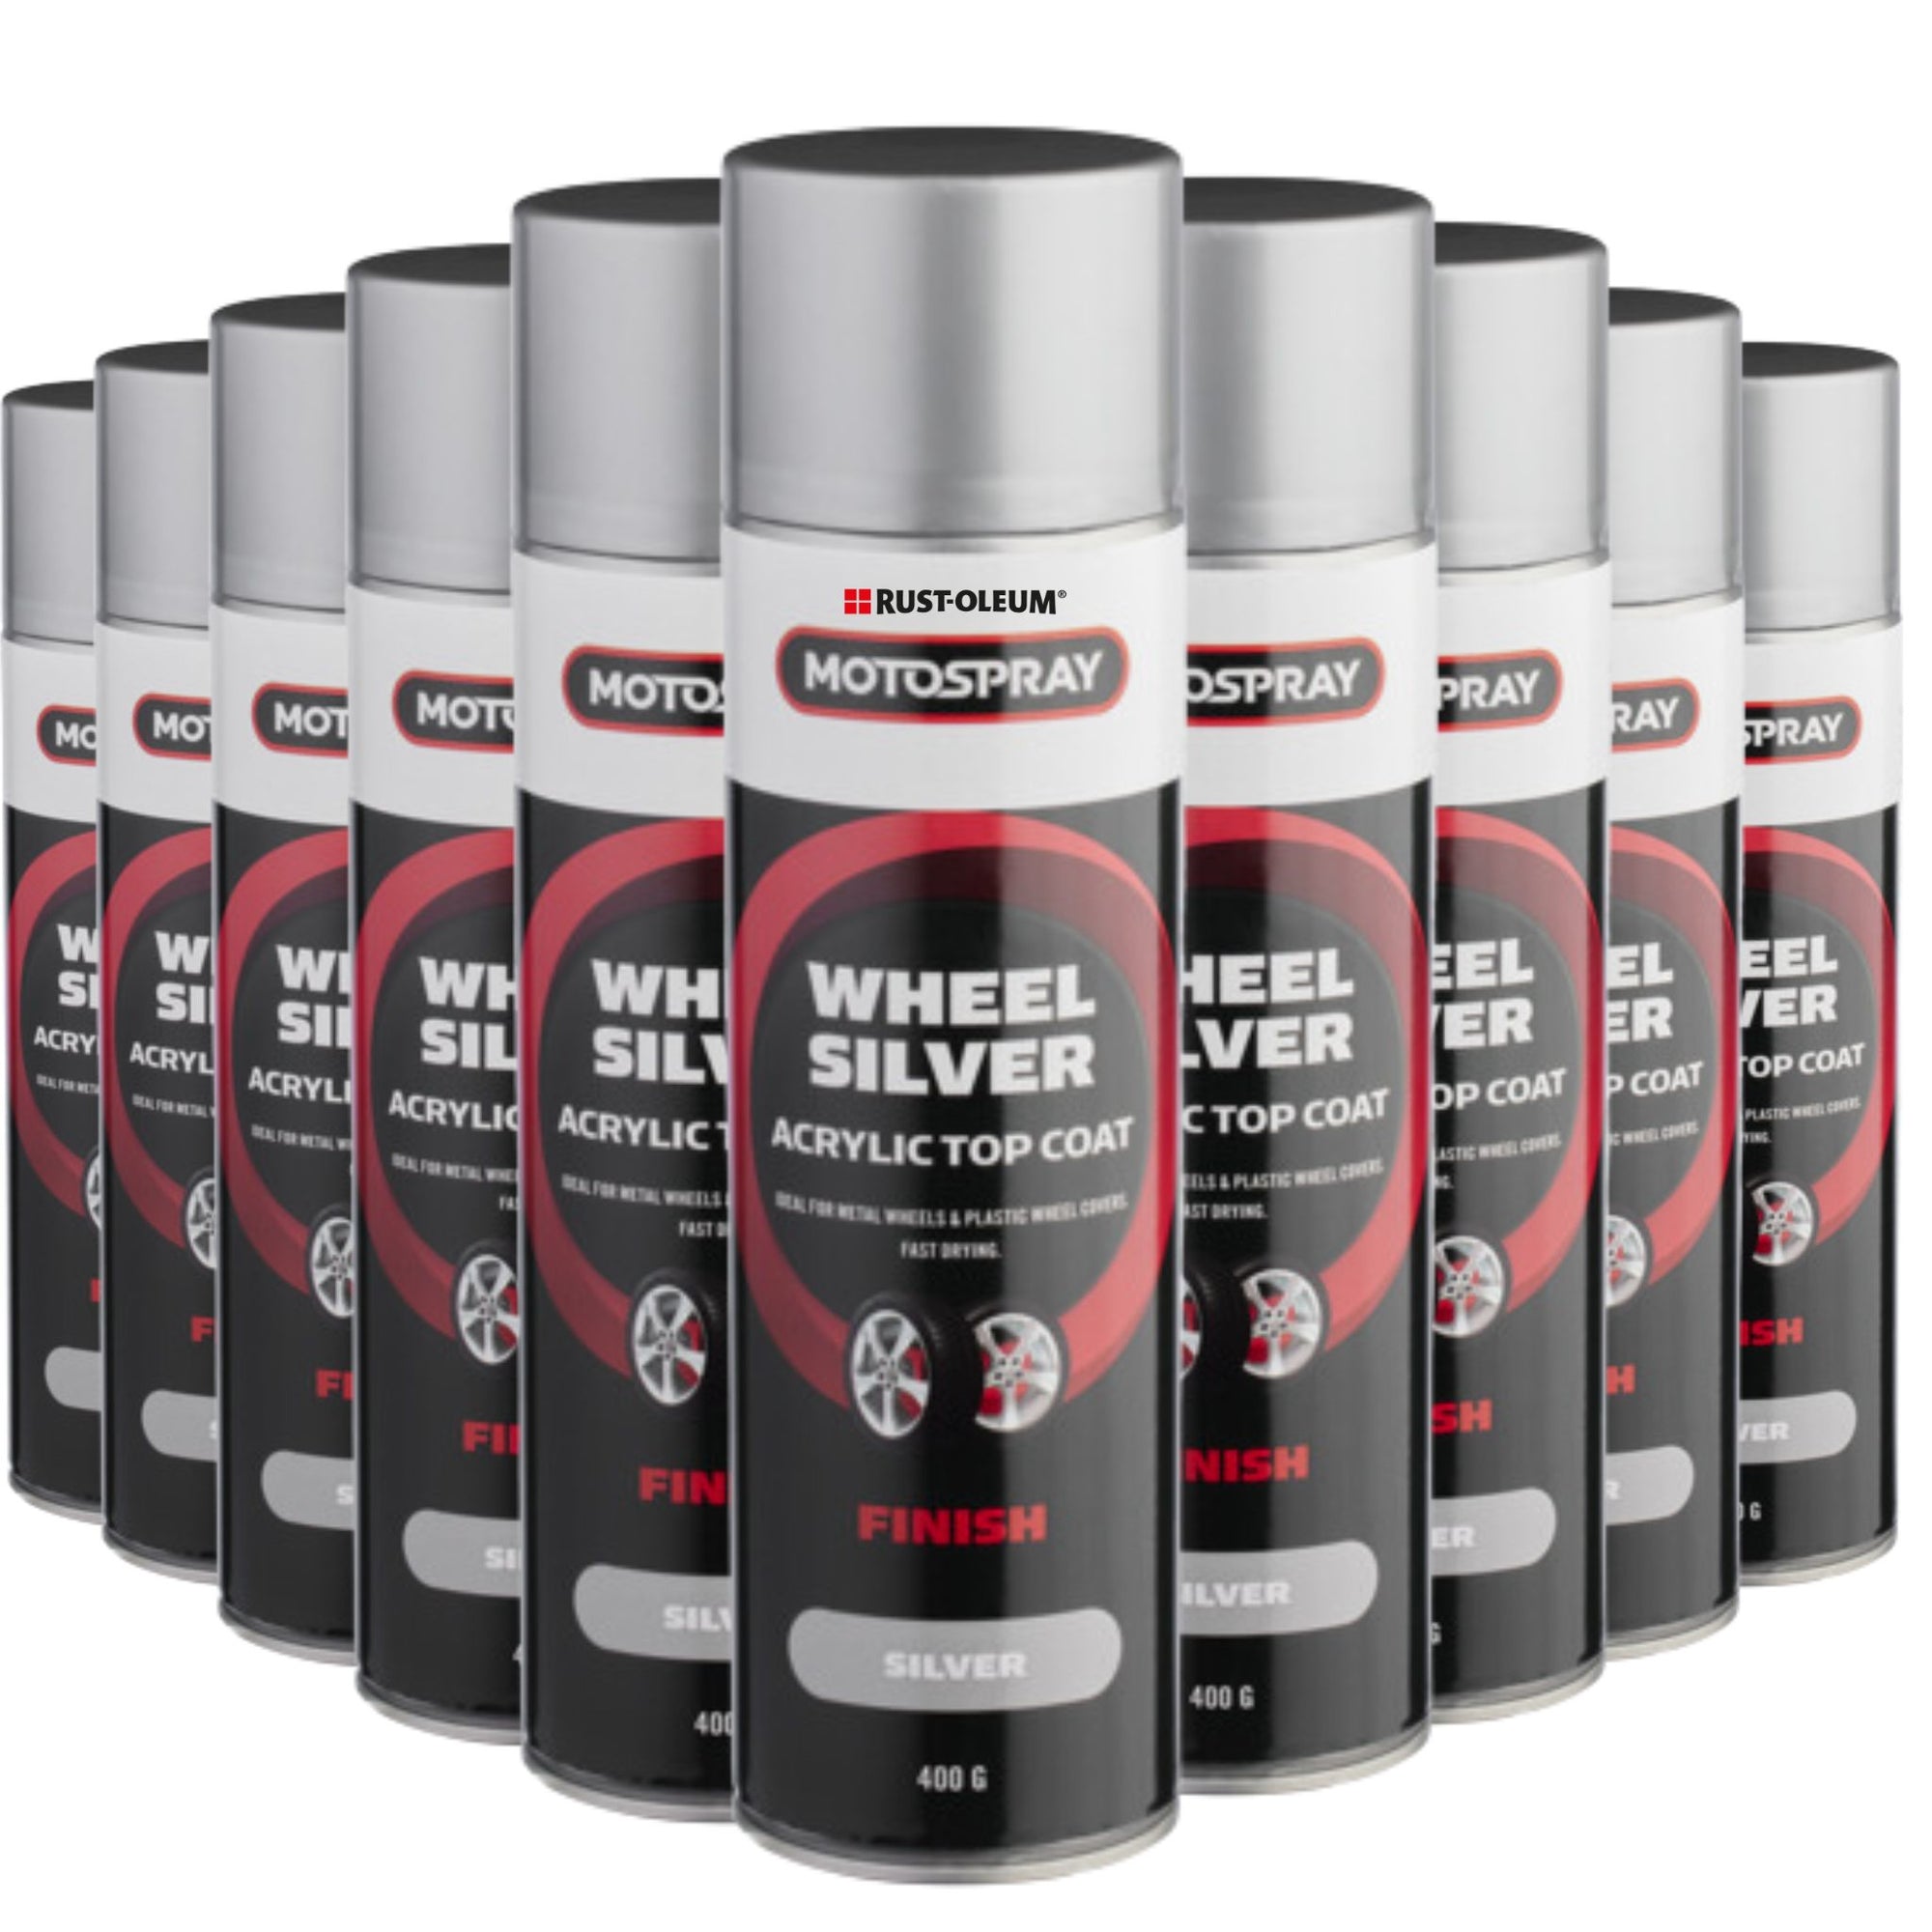 Rust-Oleum Motospray Wheel Silver Acrylic Lacquer Spray Paint - 12 Pack - South East Clearance Centre